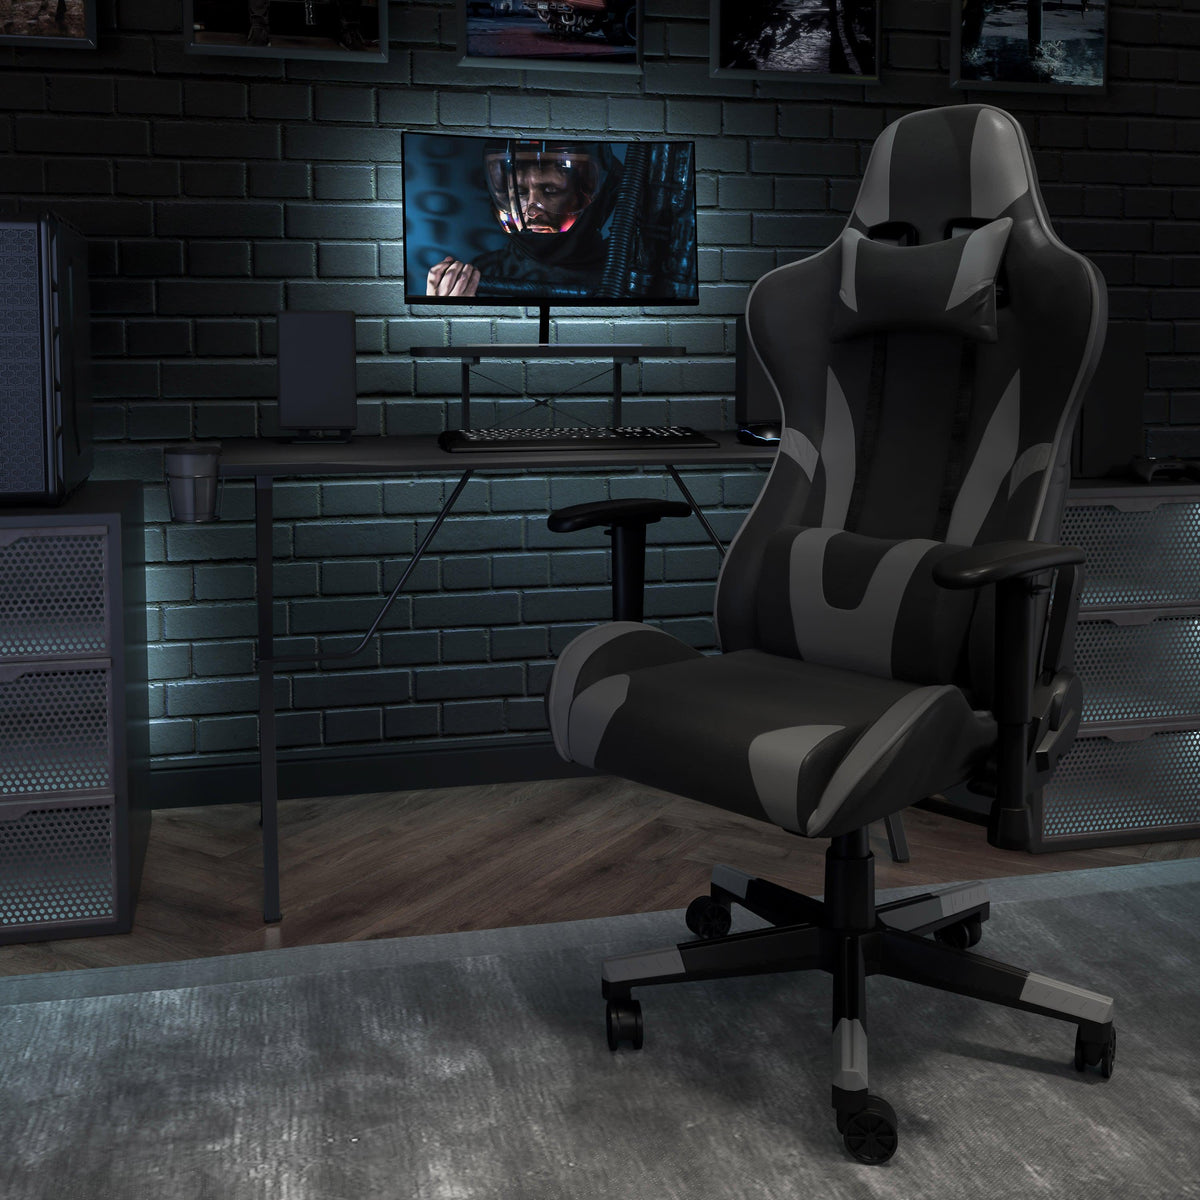 Gray |#| Racing Gaming Ergonomic Chair with Reclining Back, Footrest in Gray LeatherSoft